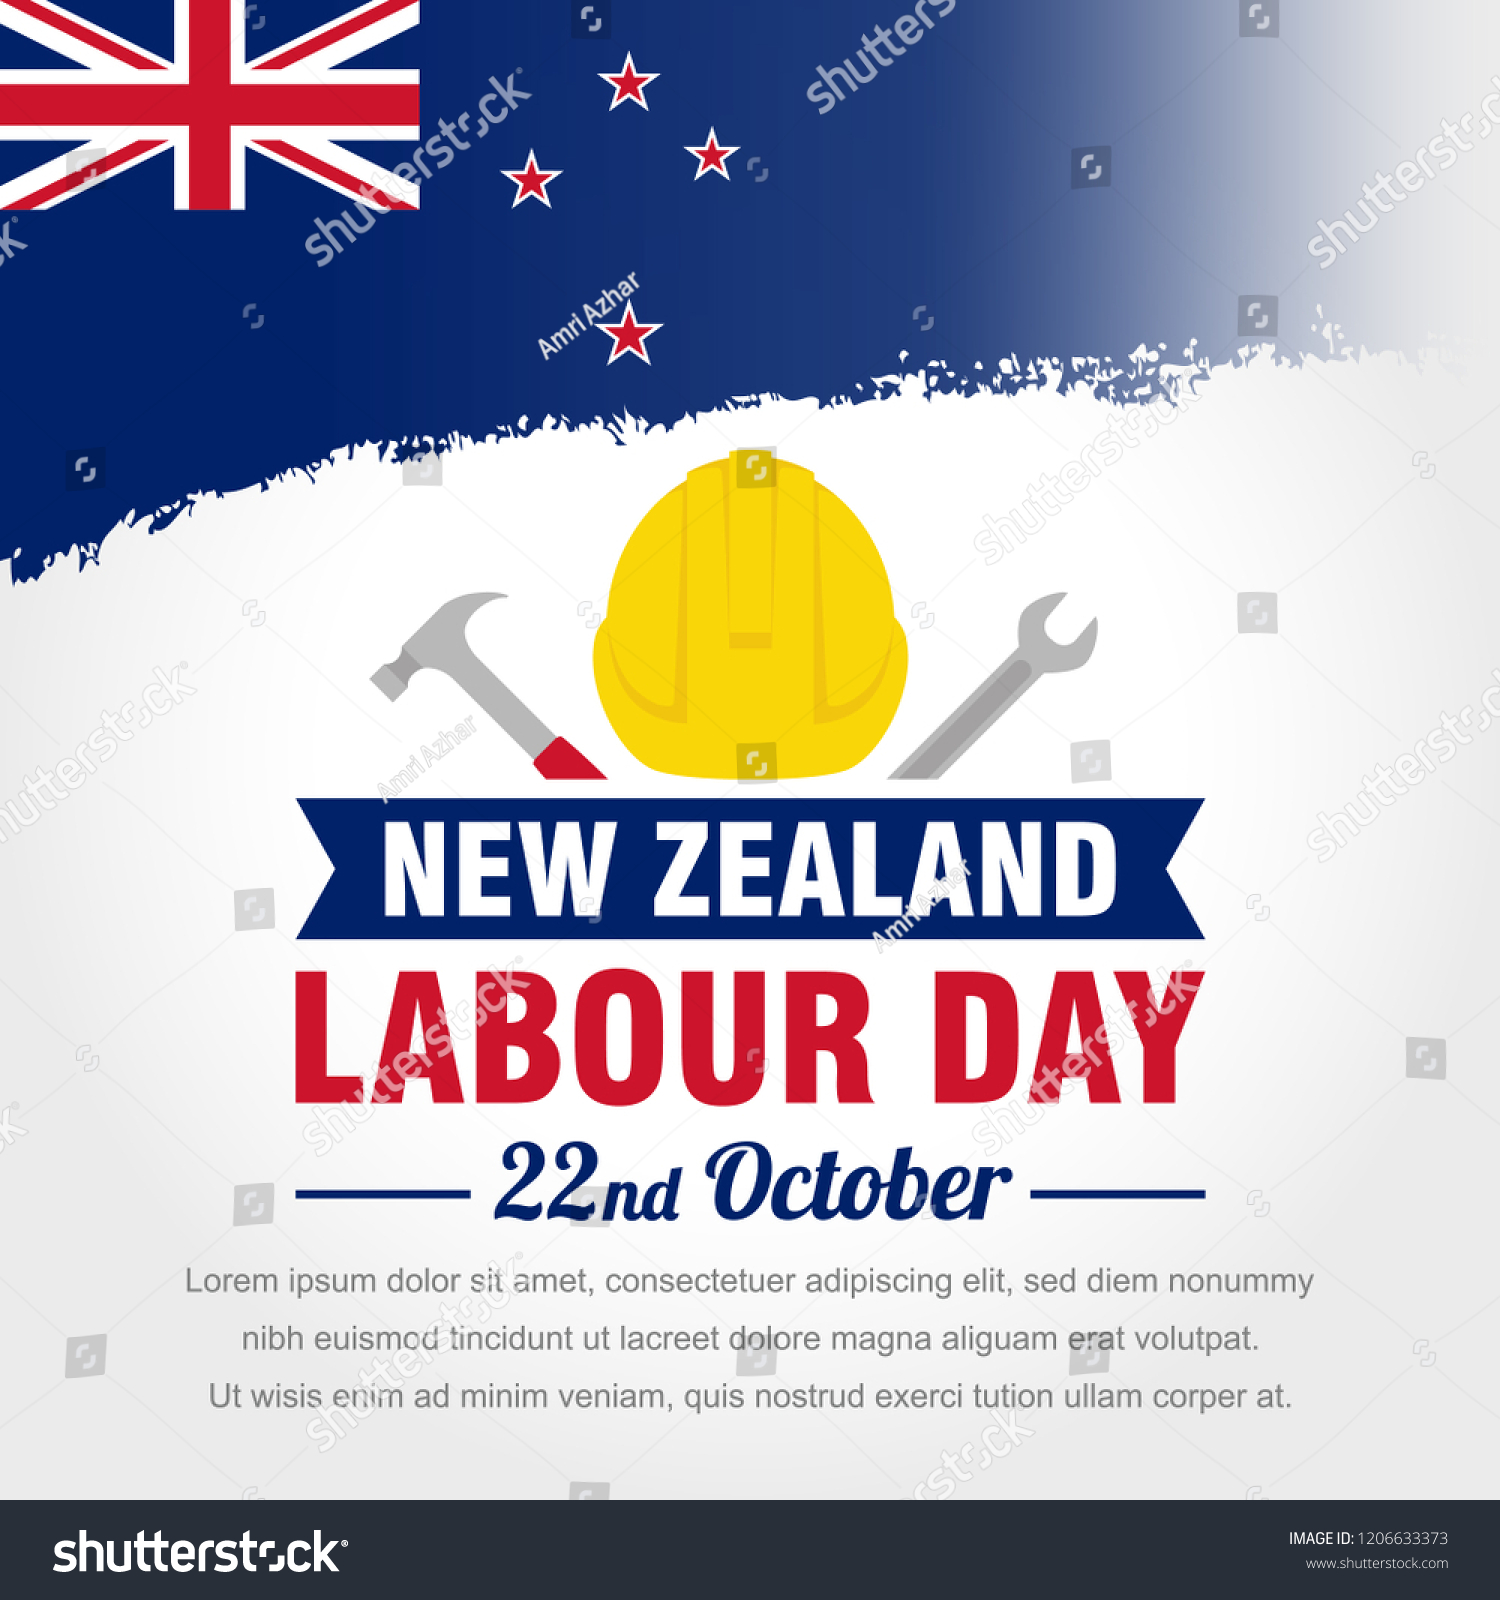 Happy Labour Day New Zealand Vector Stock Vector (Royalty Free